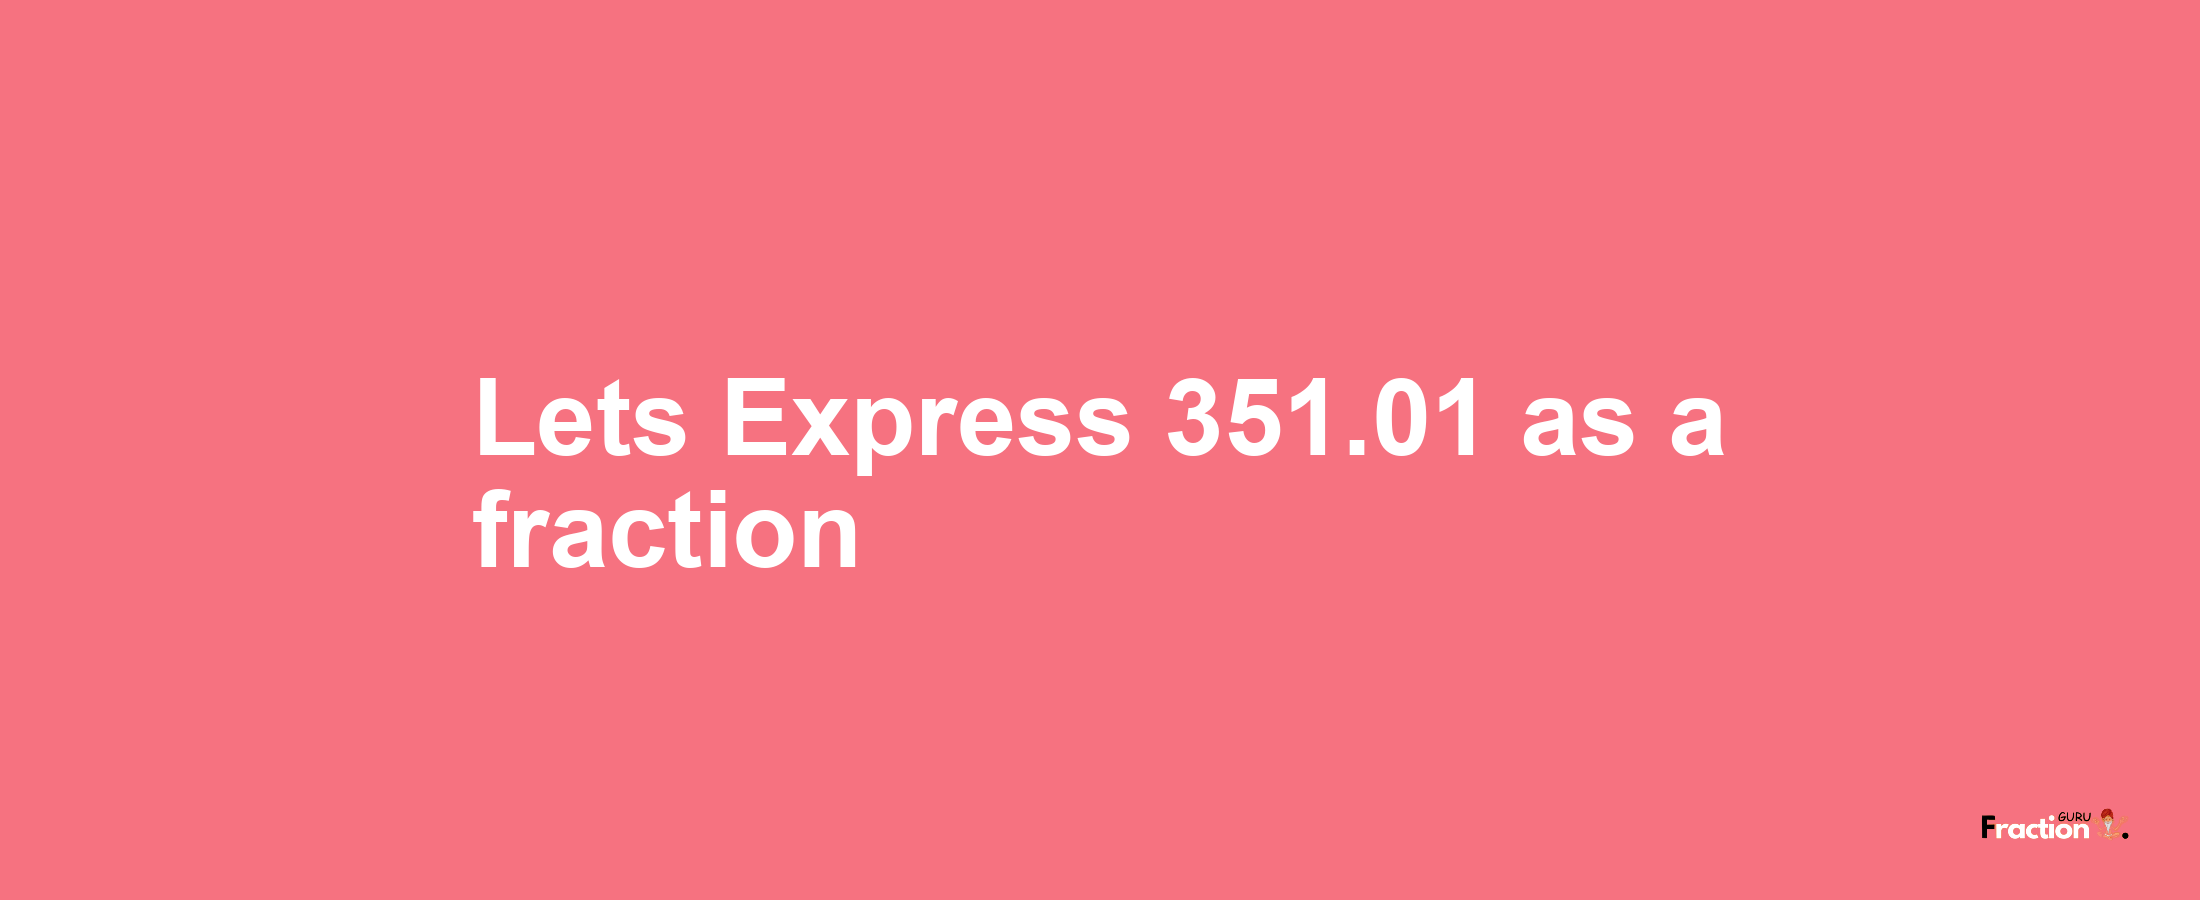 Lets Express 351.01 as afraction